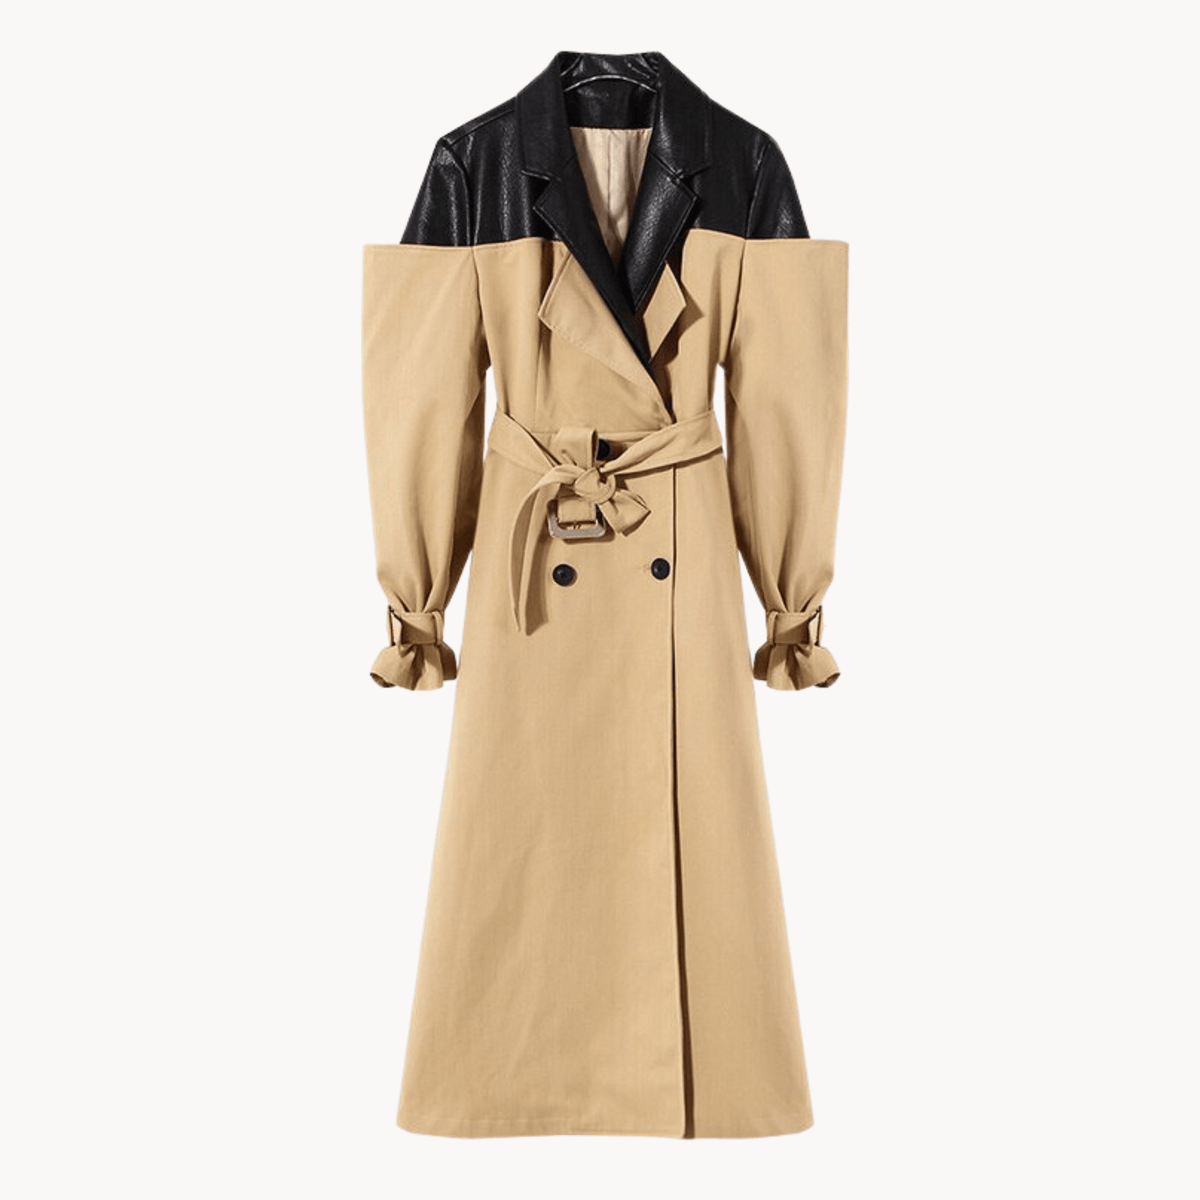 Spliced Lace Up Double-Breasted Coat - Kelly Obi New York